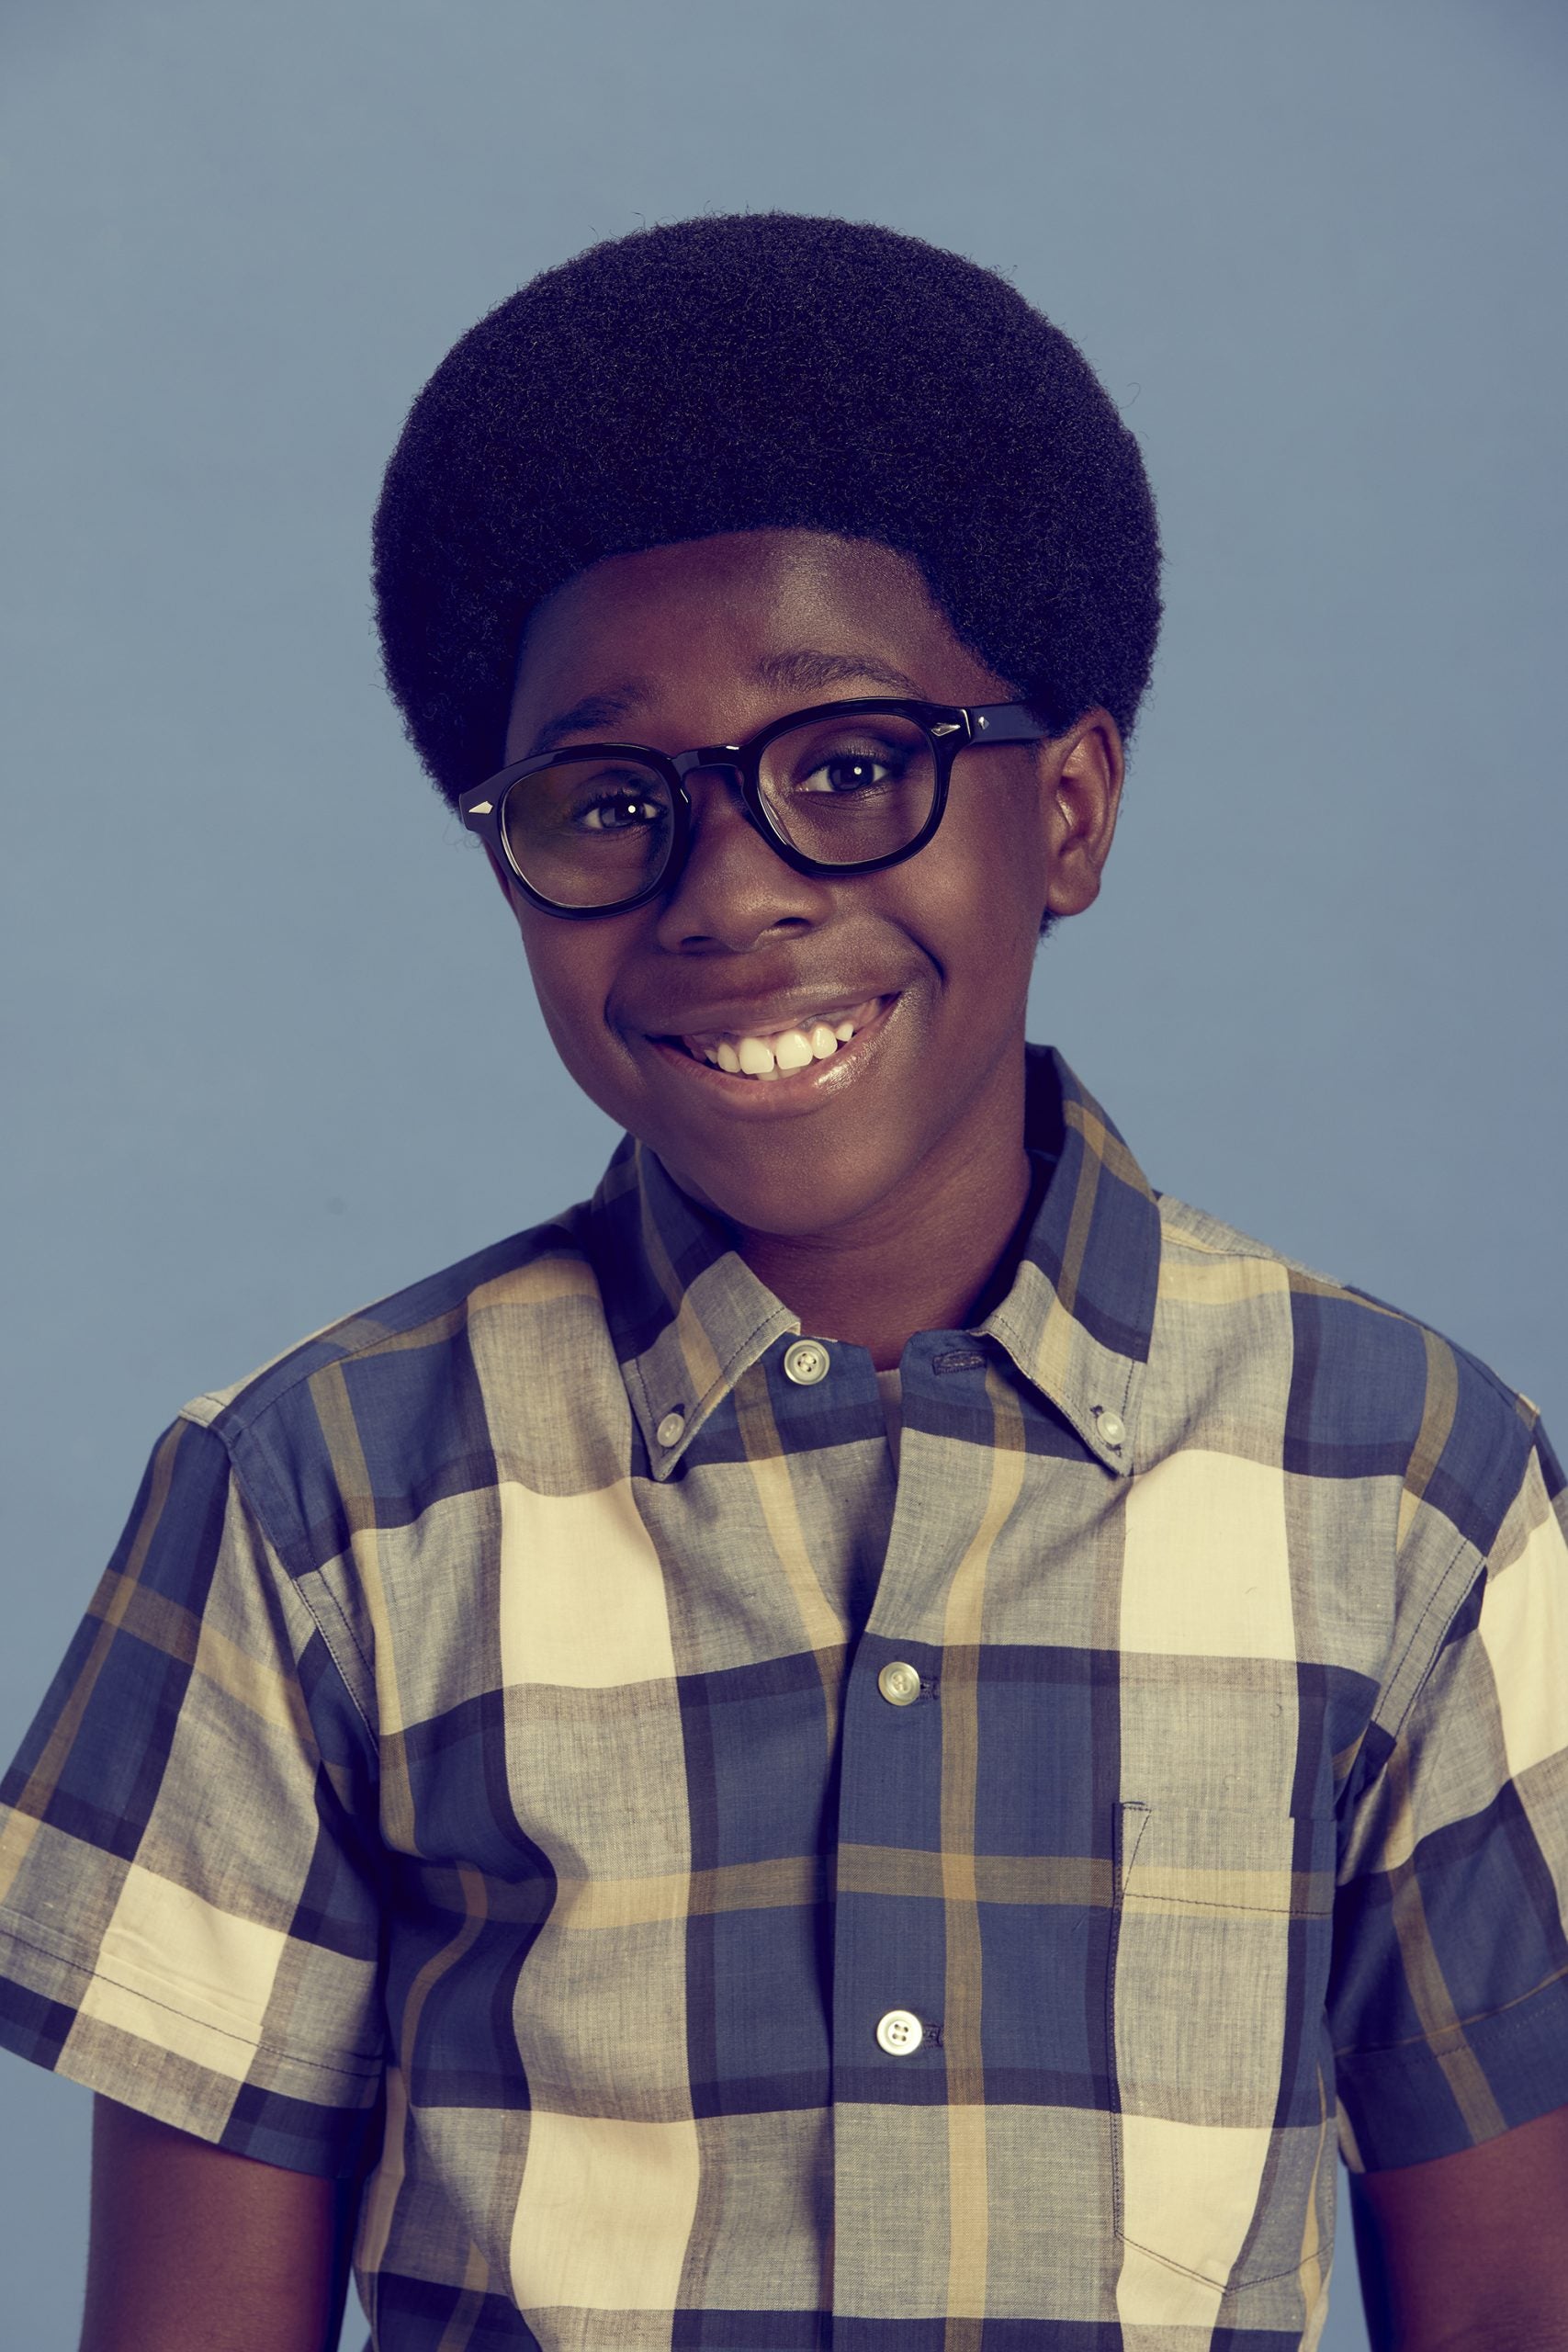 Exclusive: Take A First Look At The Beautiful Black Family In 'The Wonder Years'